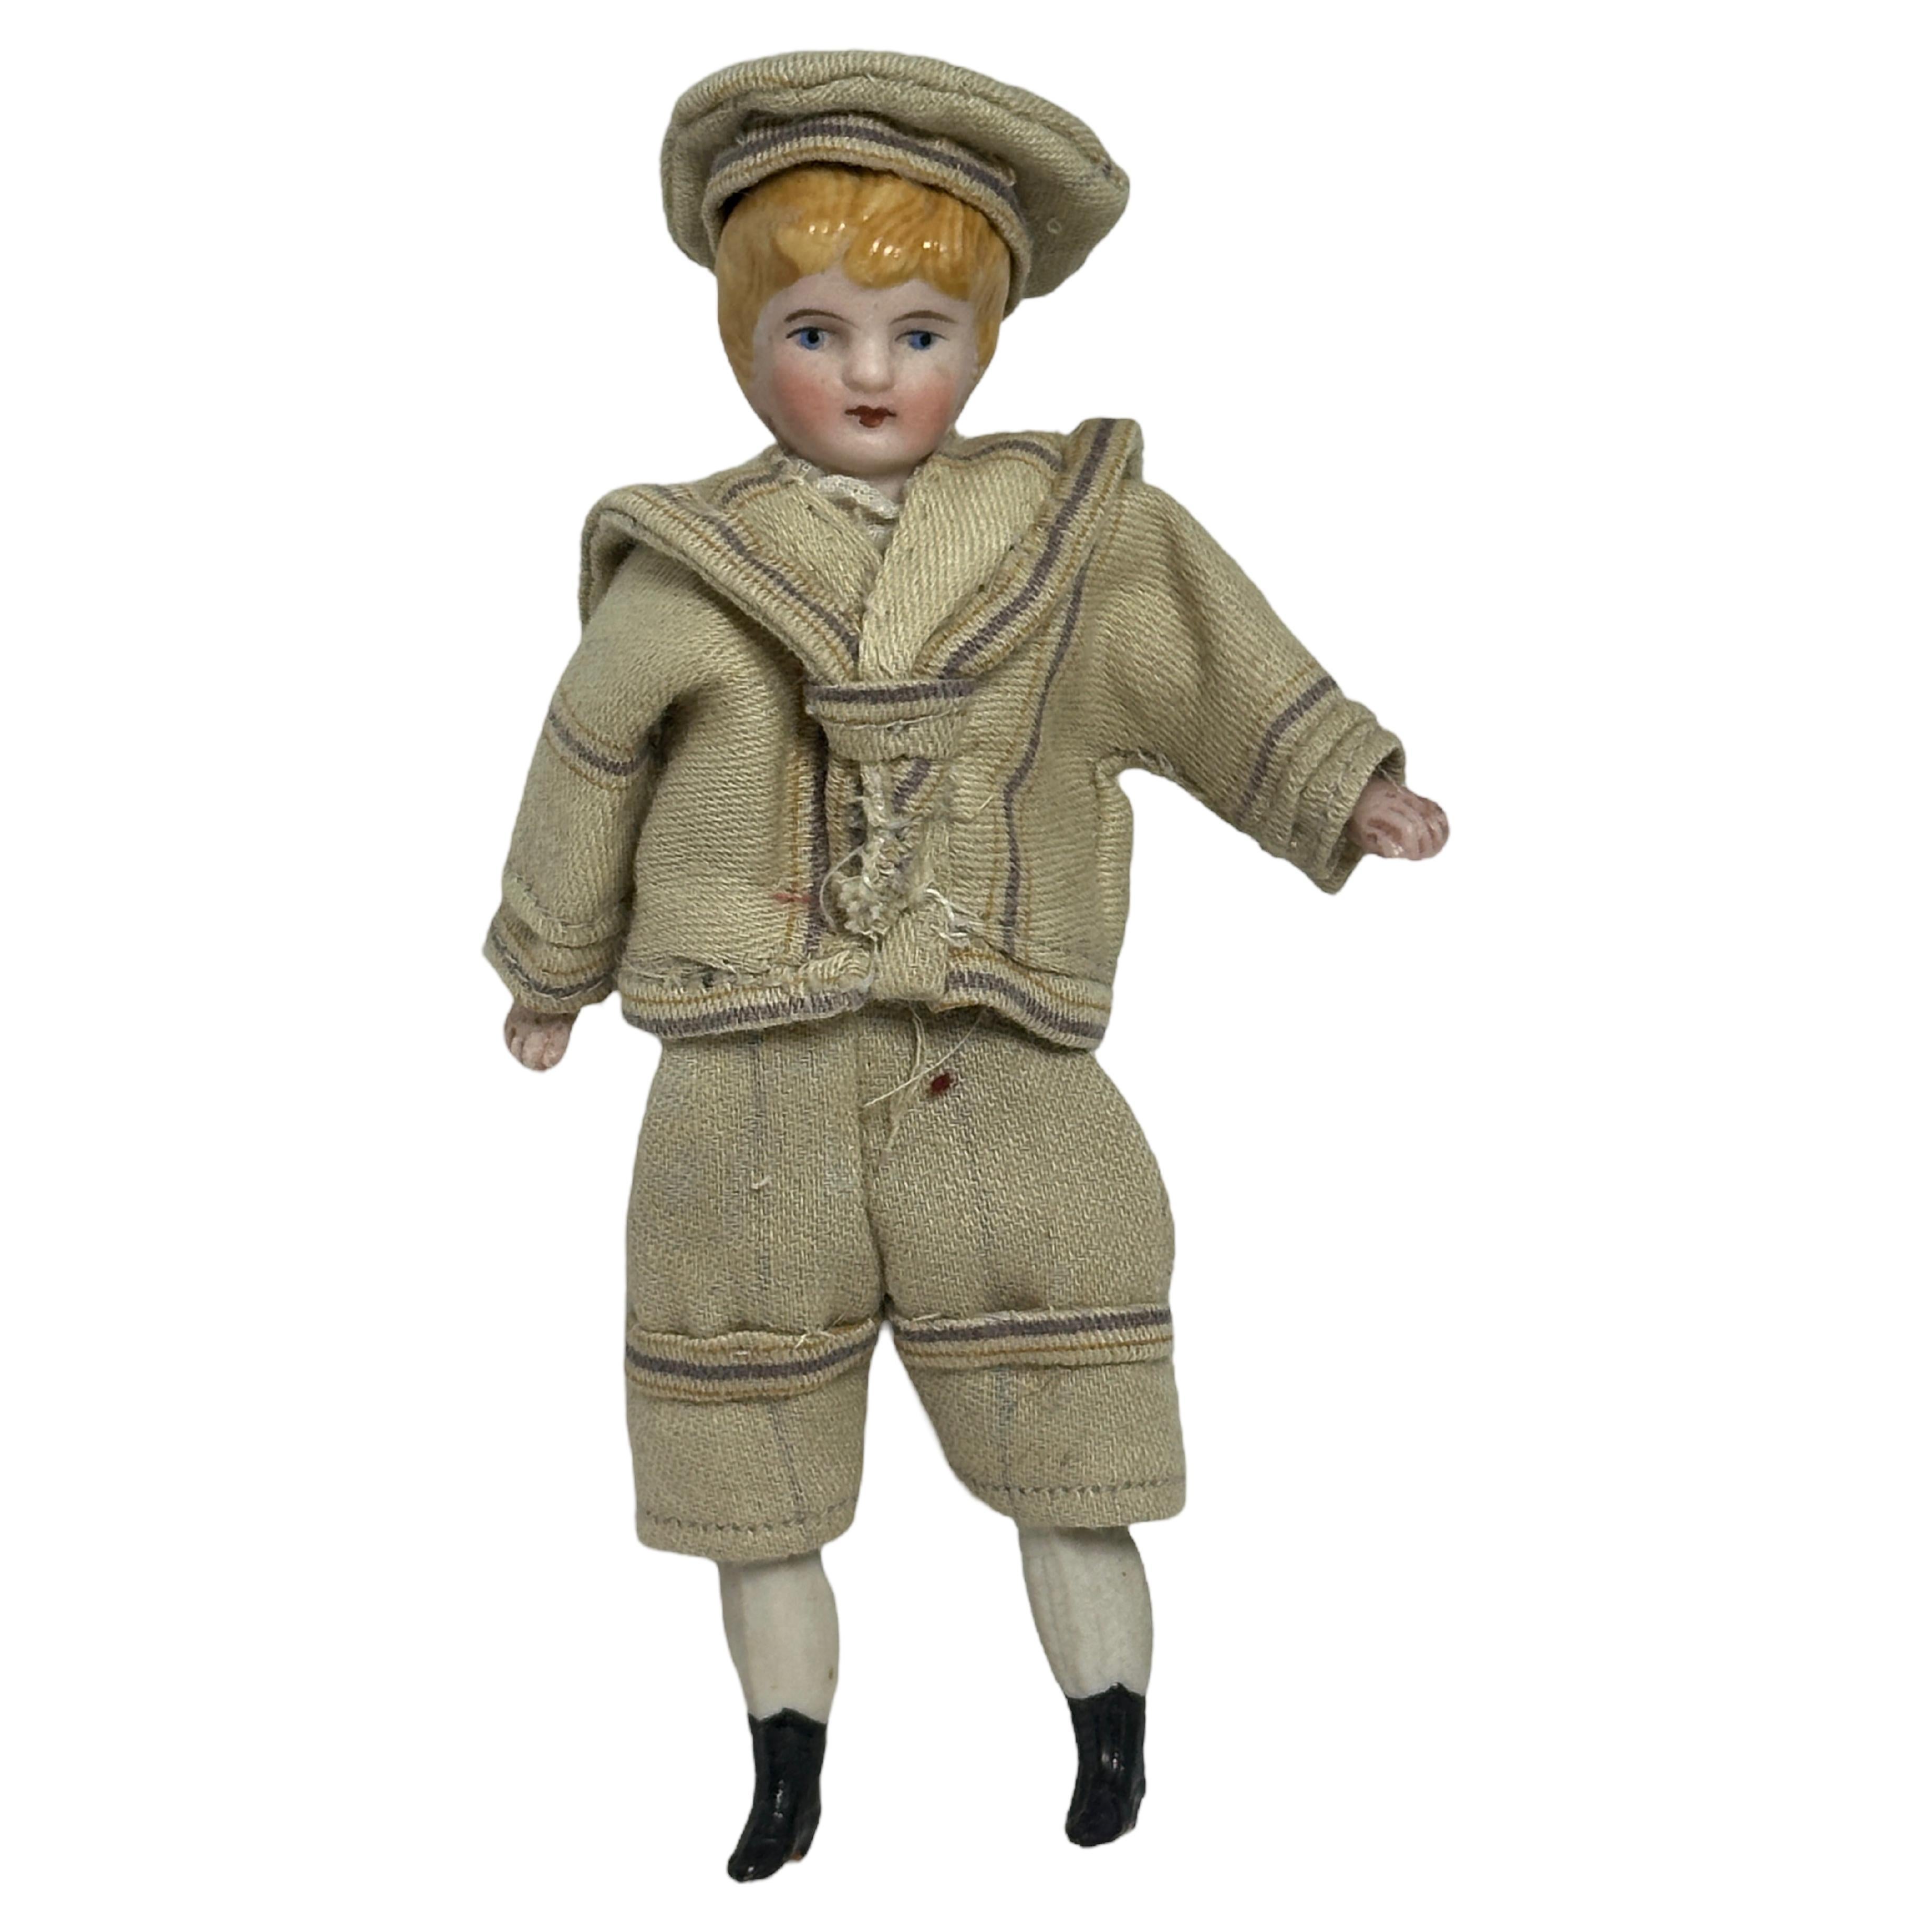 Boy dressed in Sailor Outfit Antique German Dollhouse Doll Toy 1900s For Sale